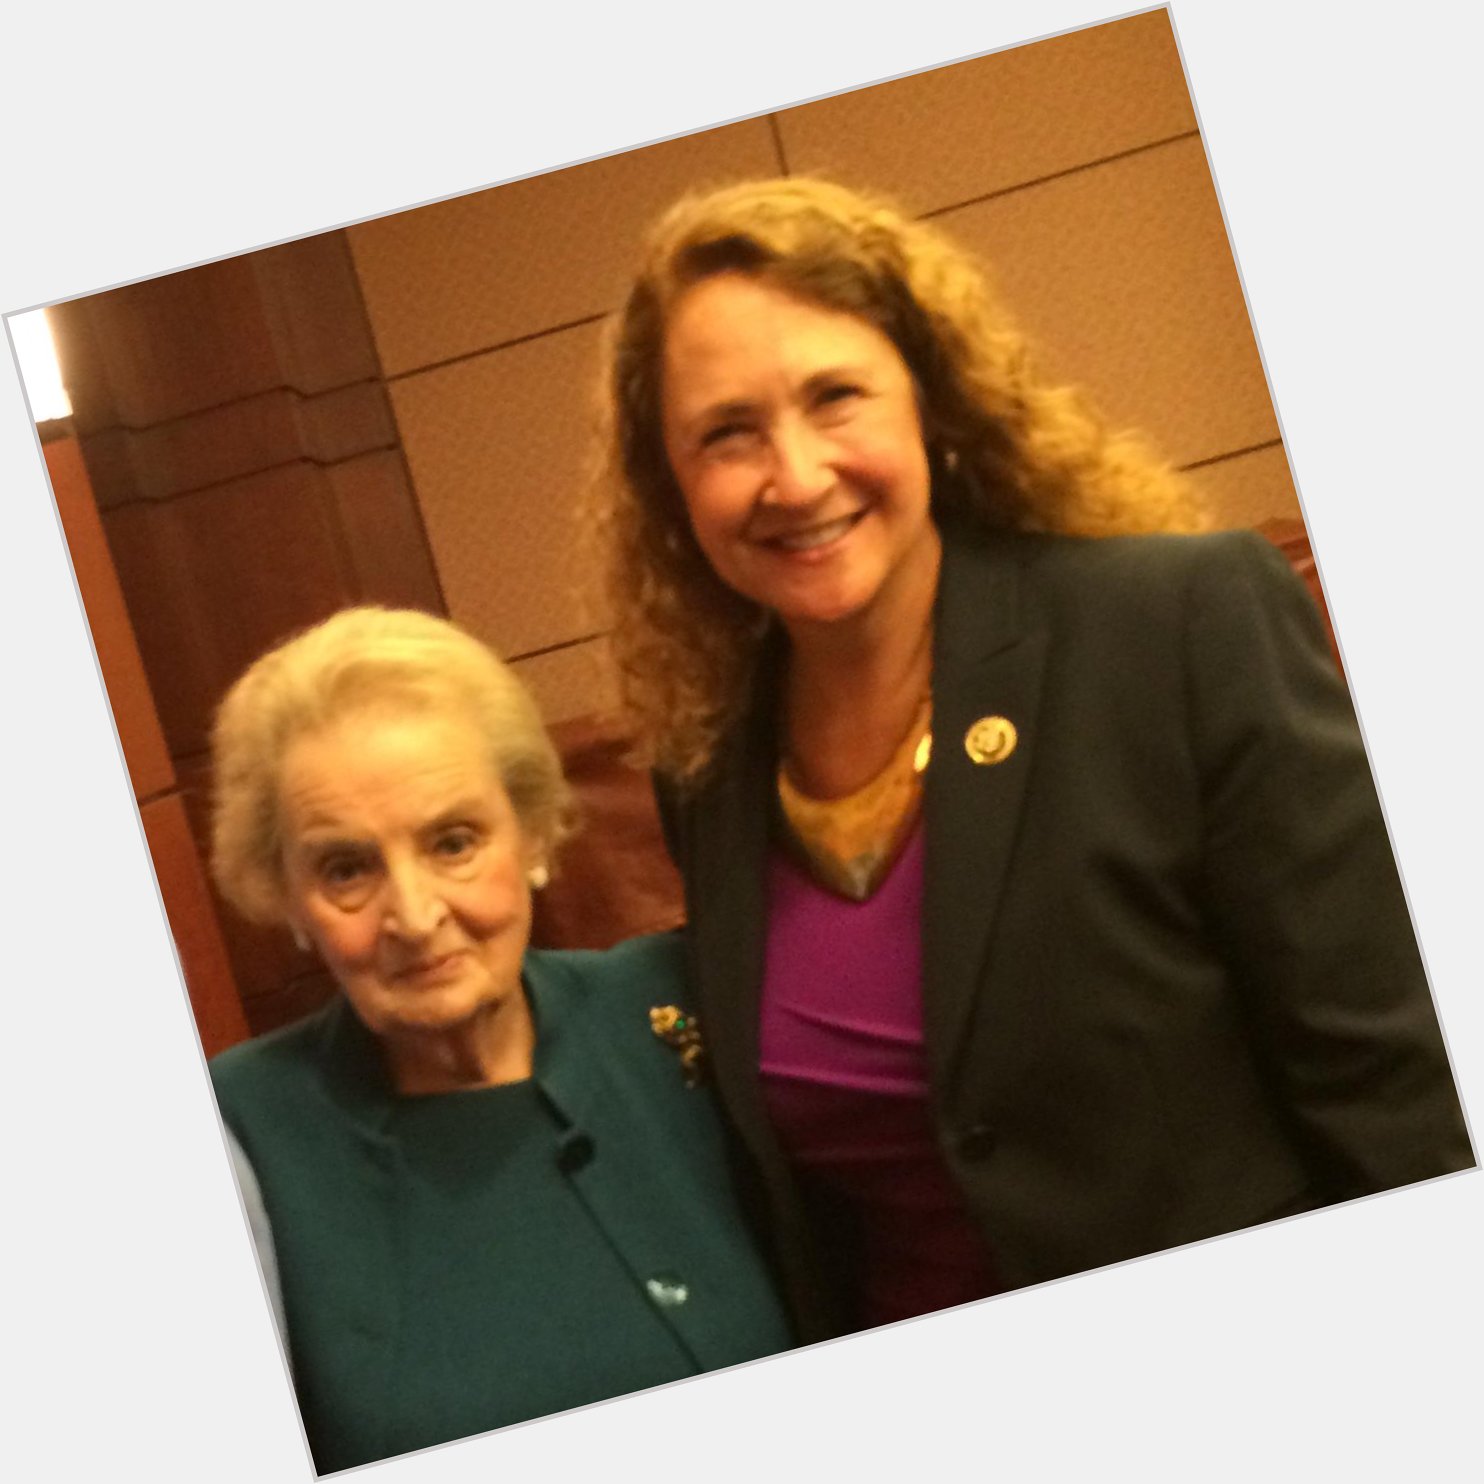 Happy Birthday to a great American, Madeleine Albright, our 1st woman Secretary of State! Thank you for your service. 